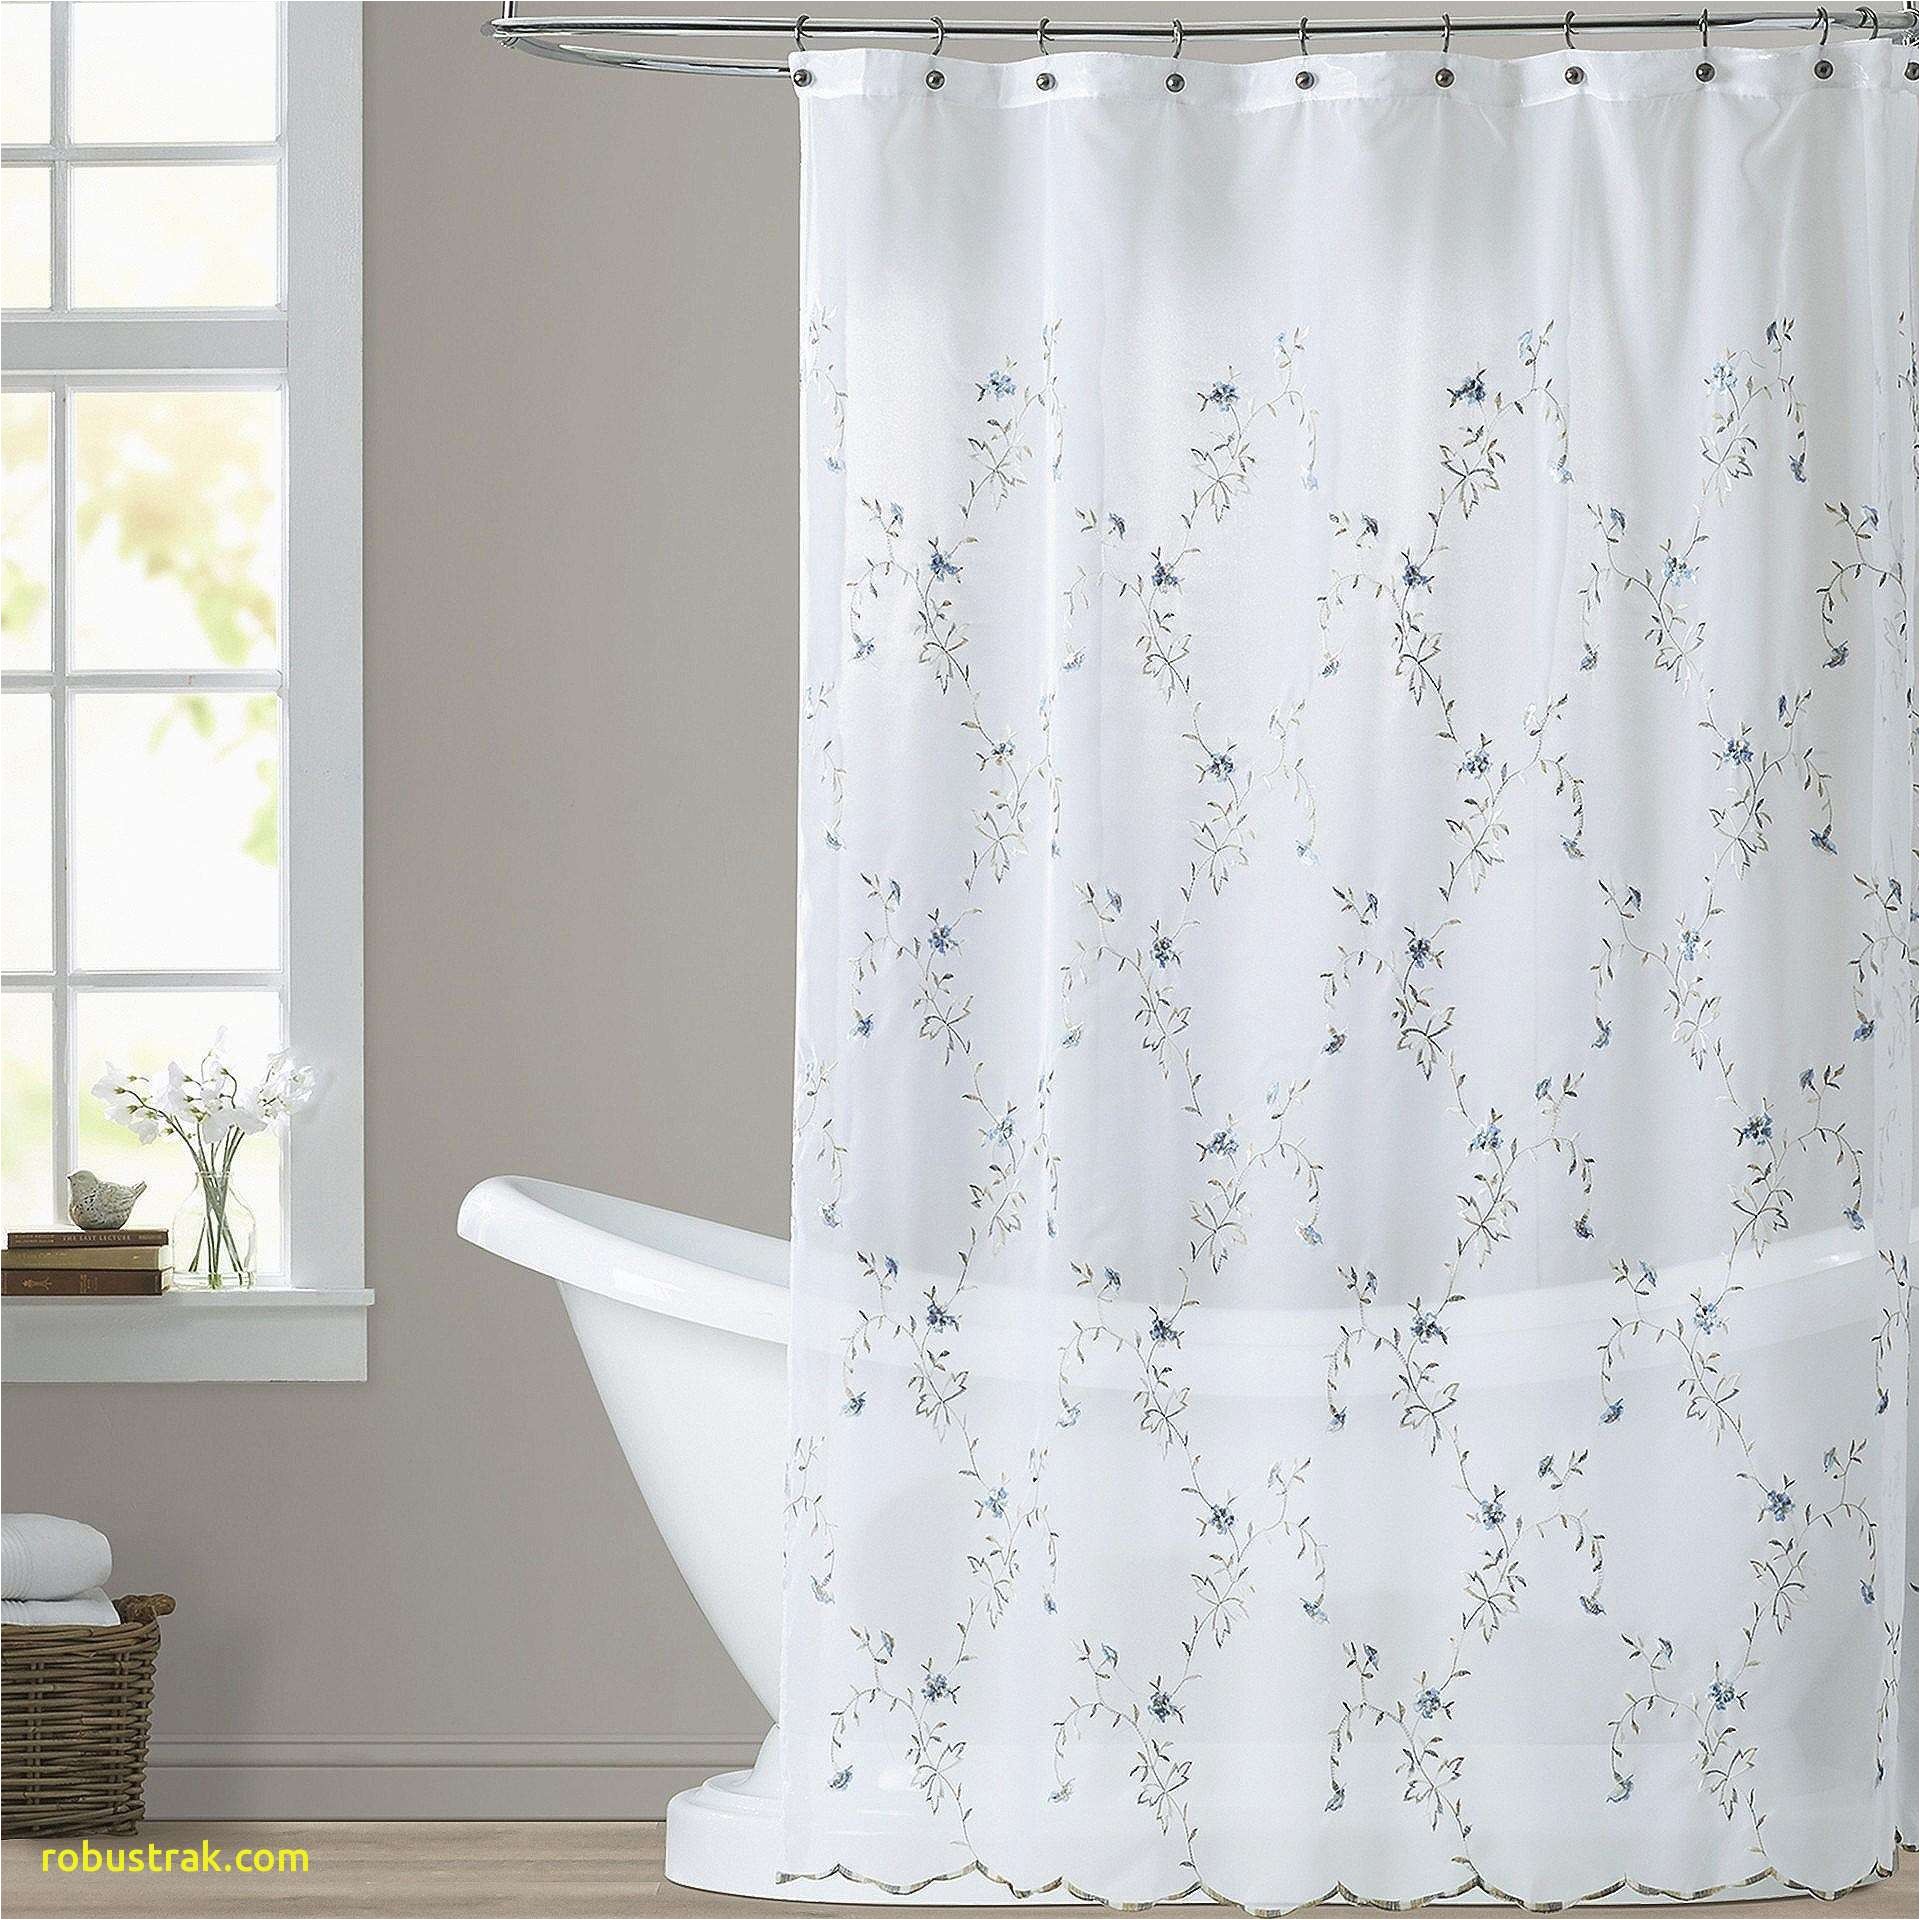 Shower Curtains Longer Than 72 Inches 39 Elegant Shower Curtain Bar Design Of Shower Curtains Longer Than